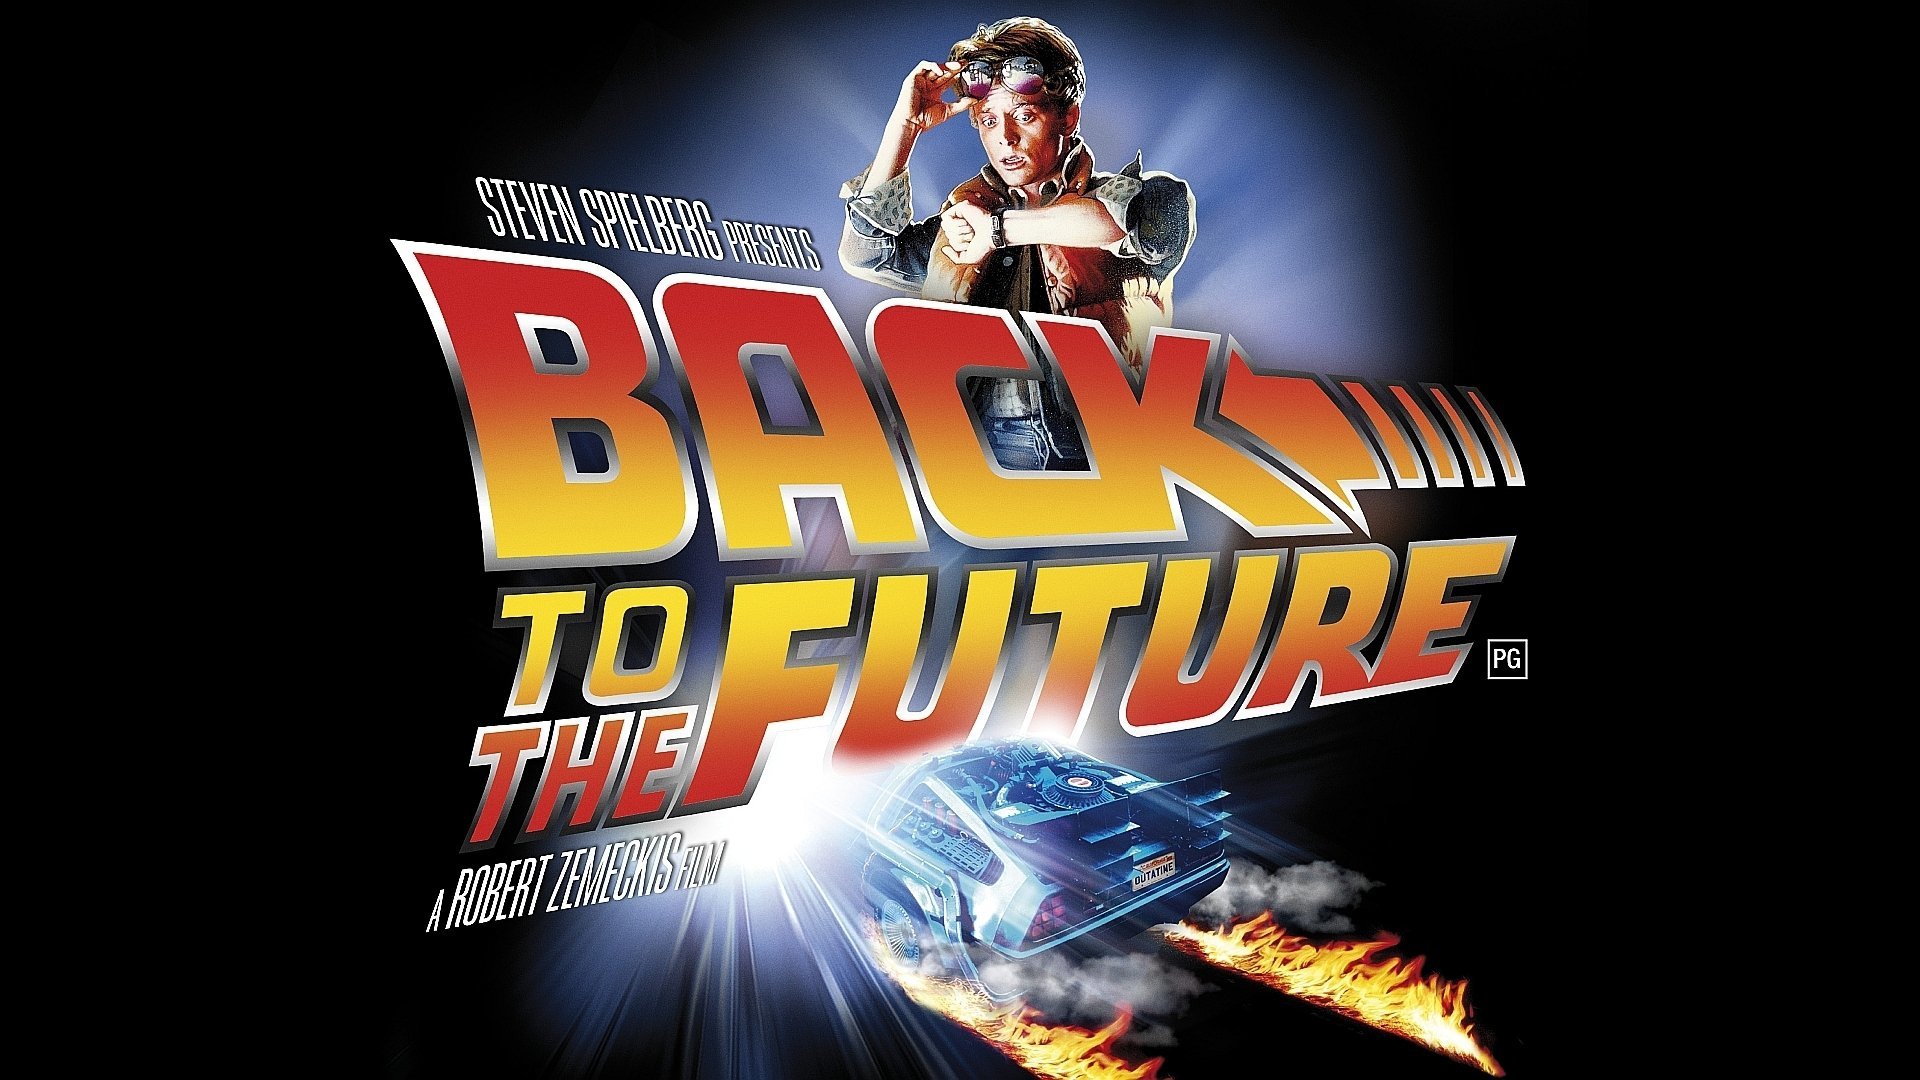 Back To The Future wallpapers 1920x1080 Full HD (1080p) desktop backgrounds